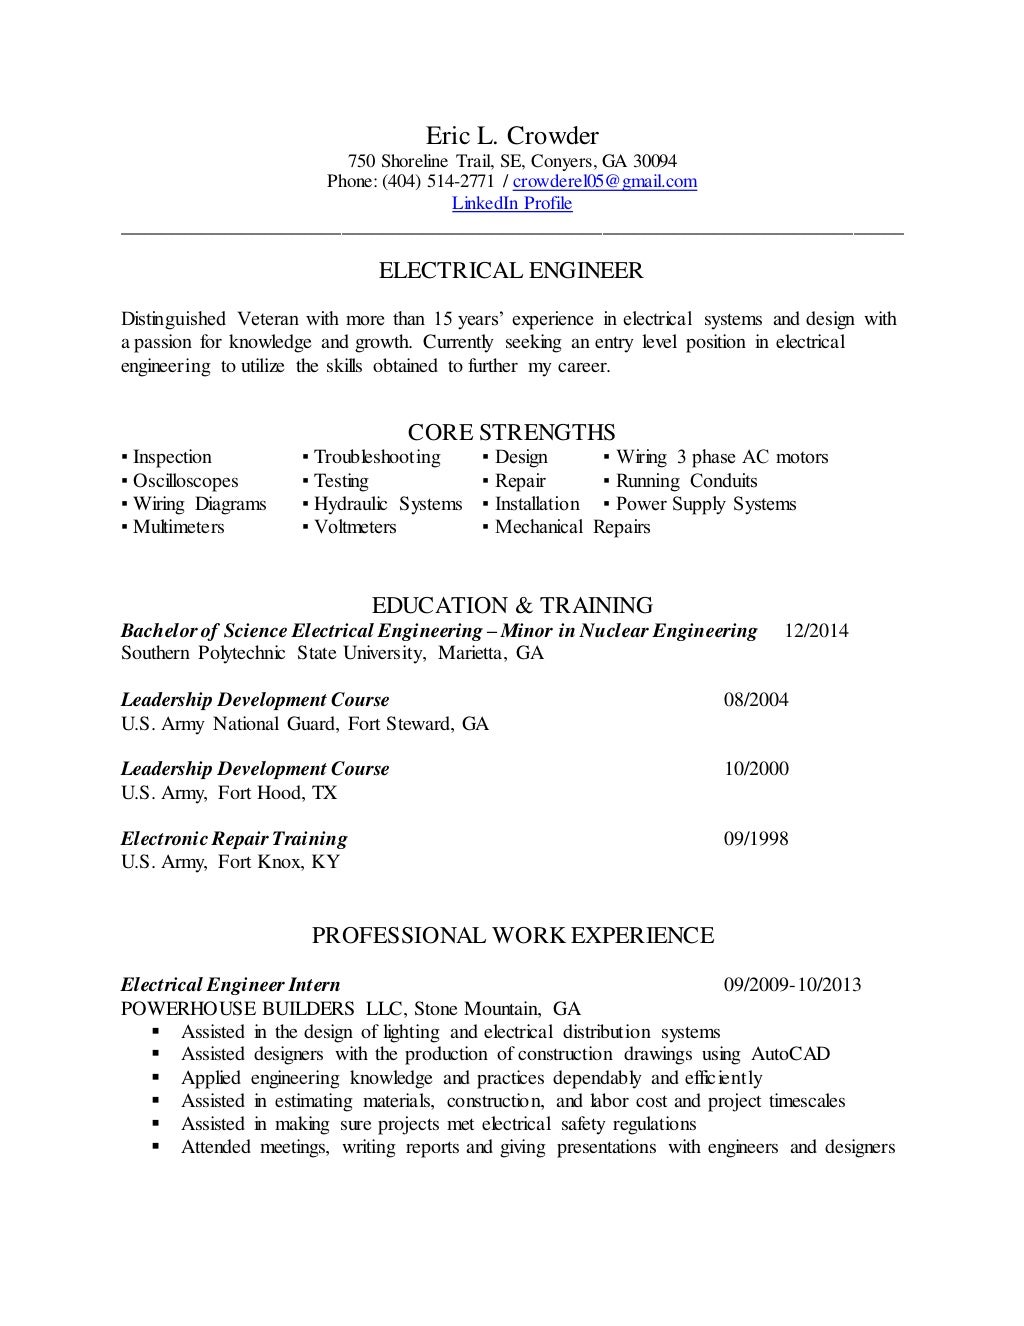 resume format in word for electrical engineer